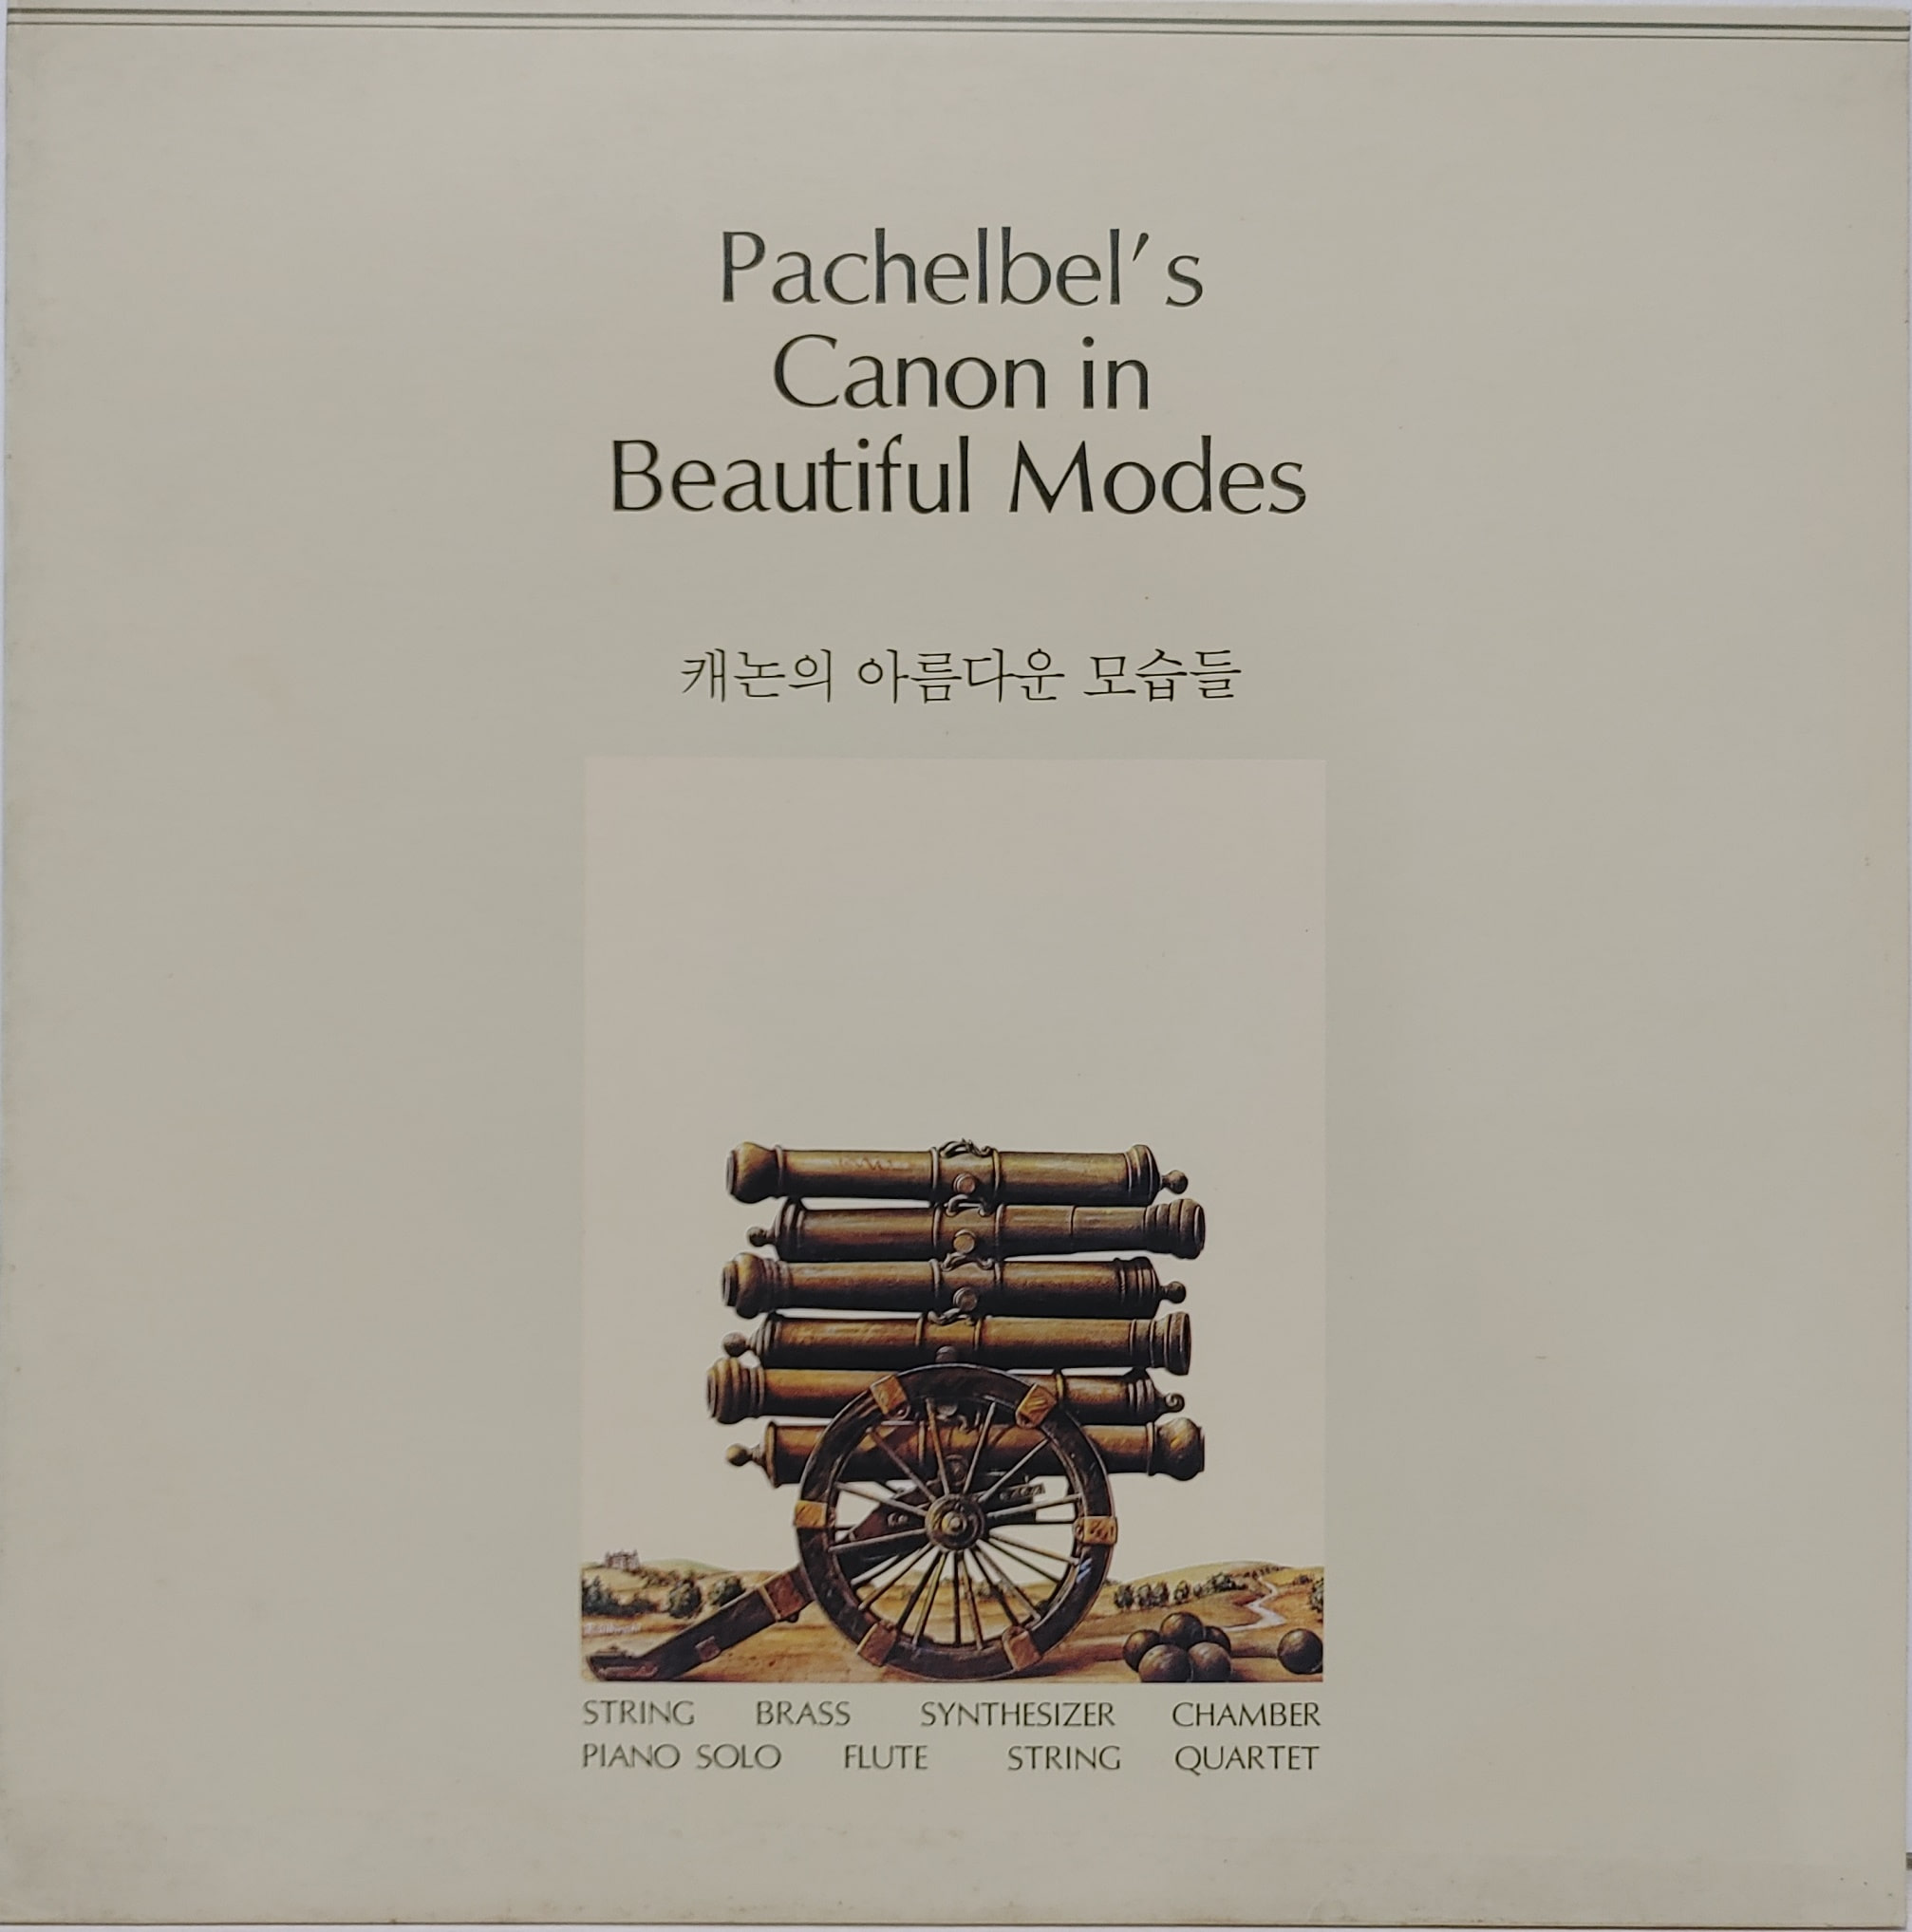 Pachelbel / Canon in Beautiful Modes